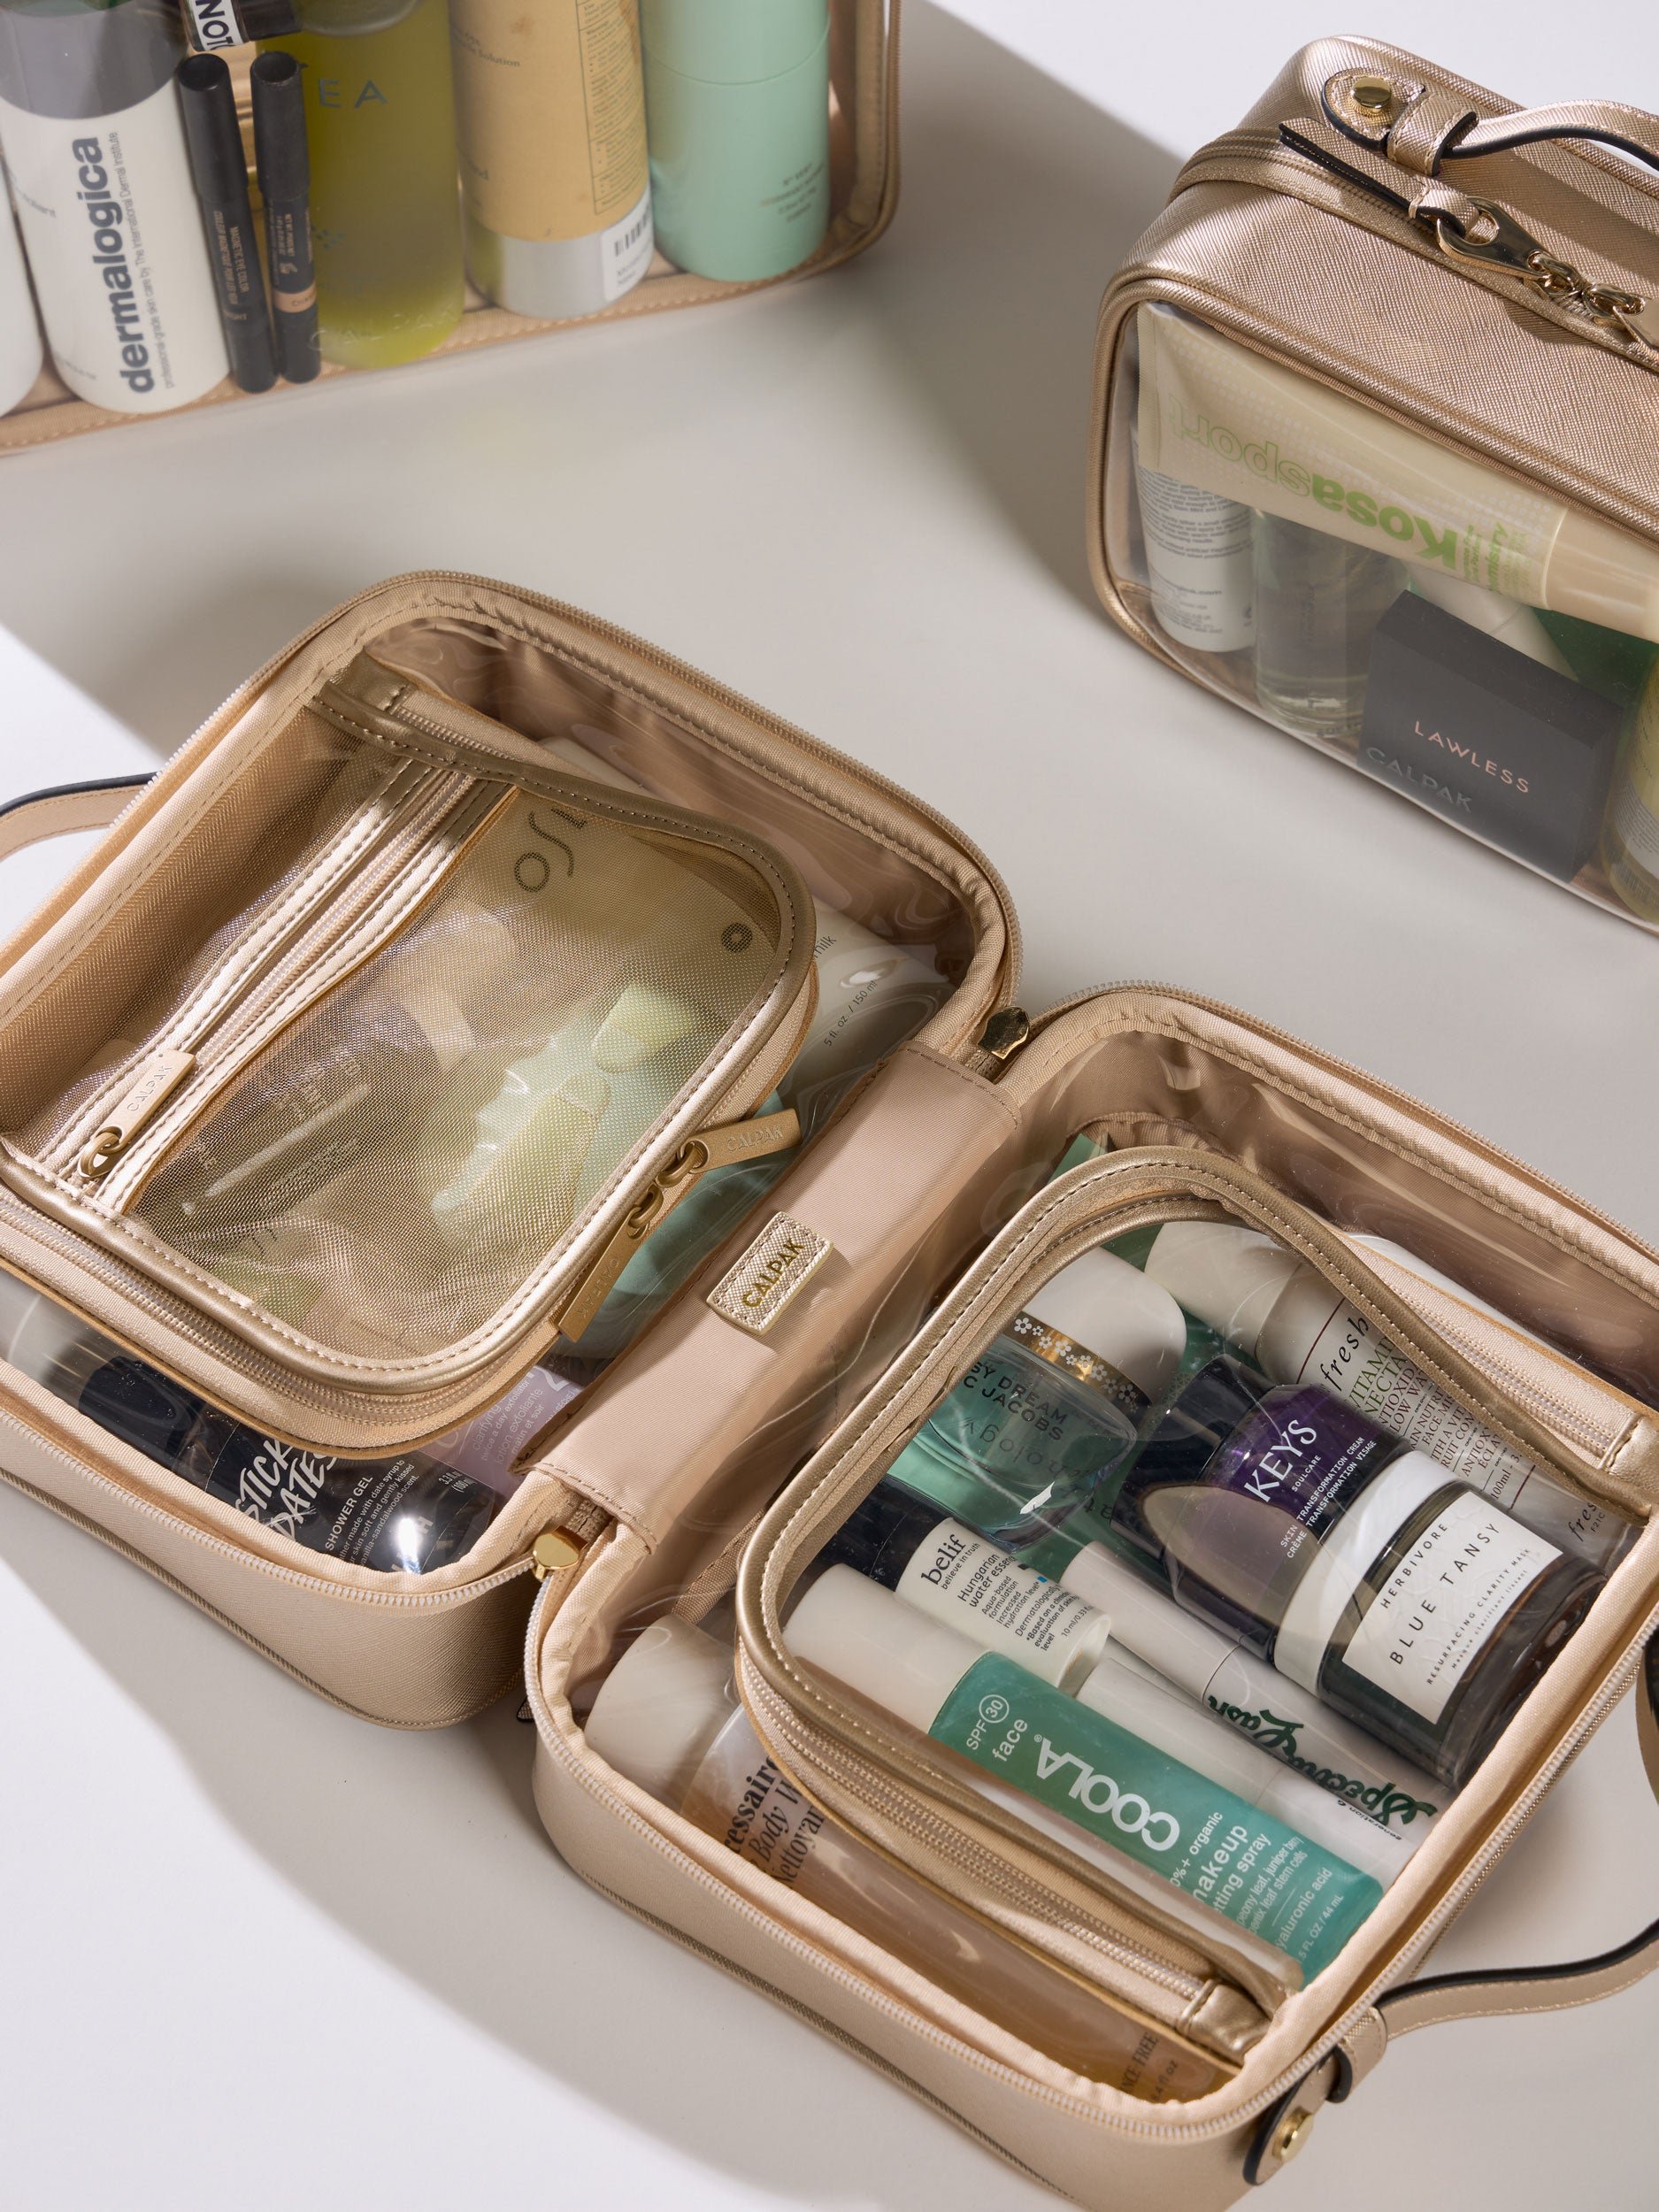 Medium Clear Cosmetic Case in metallic gold for organizer personal skincare items and makeup